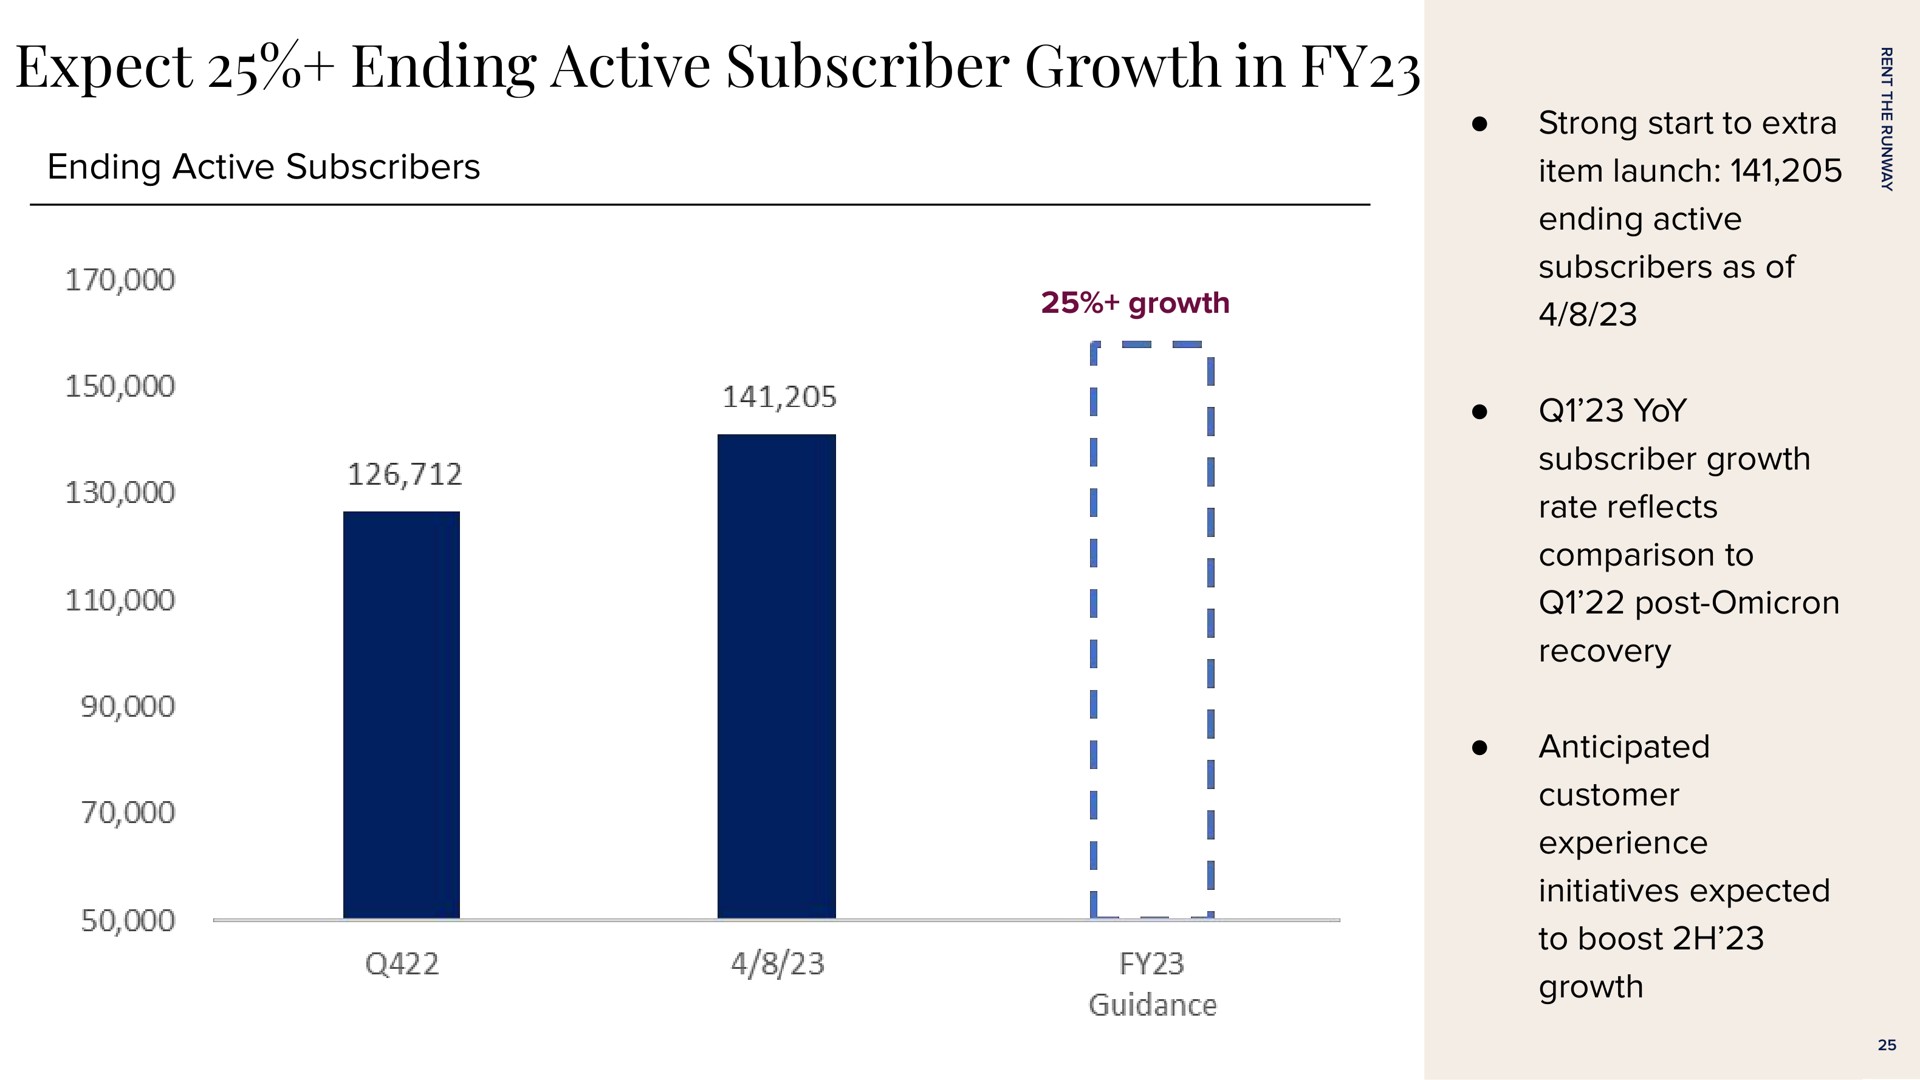 expect ending active subscriber growth in ending active subscribers strong start to extra item launch ending active subscribers as of yoy subscriber growth rate comparison to post omicron recovery anticipated customer experience initiatives expected to boost growth | Rent The Runway